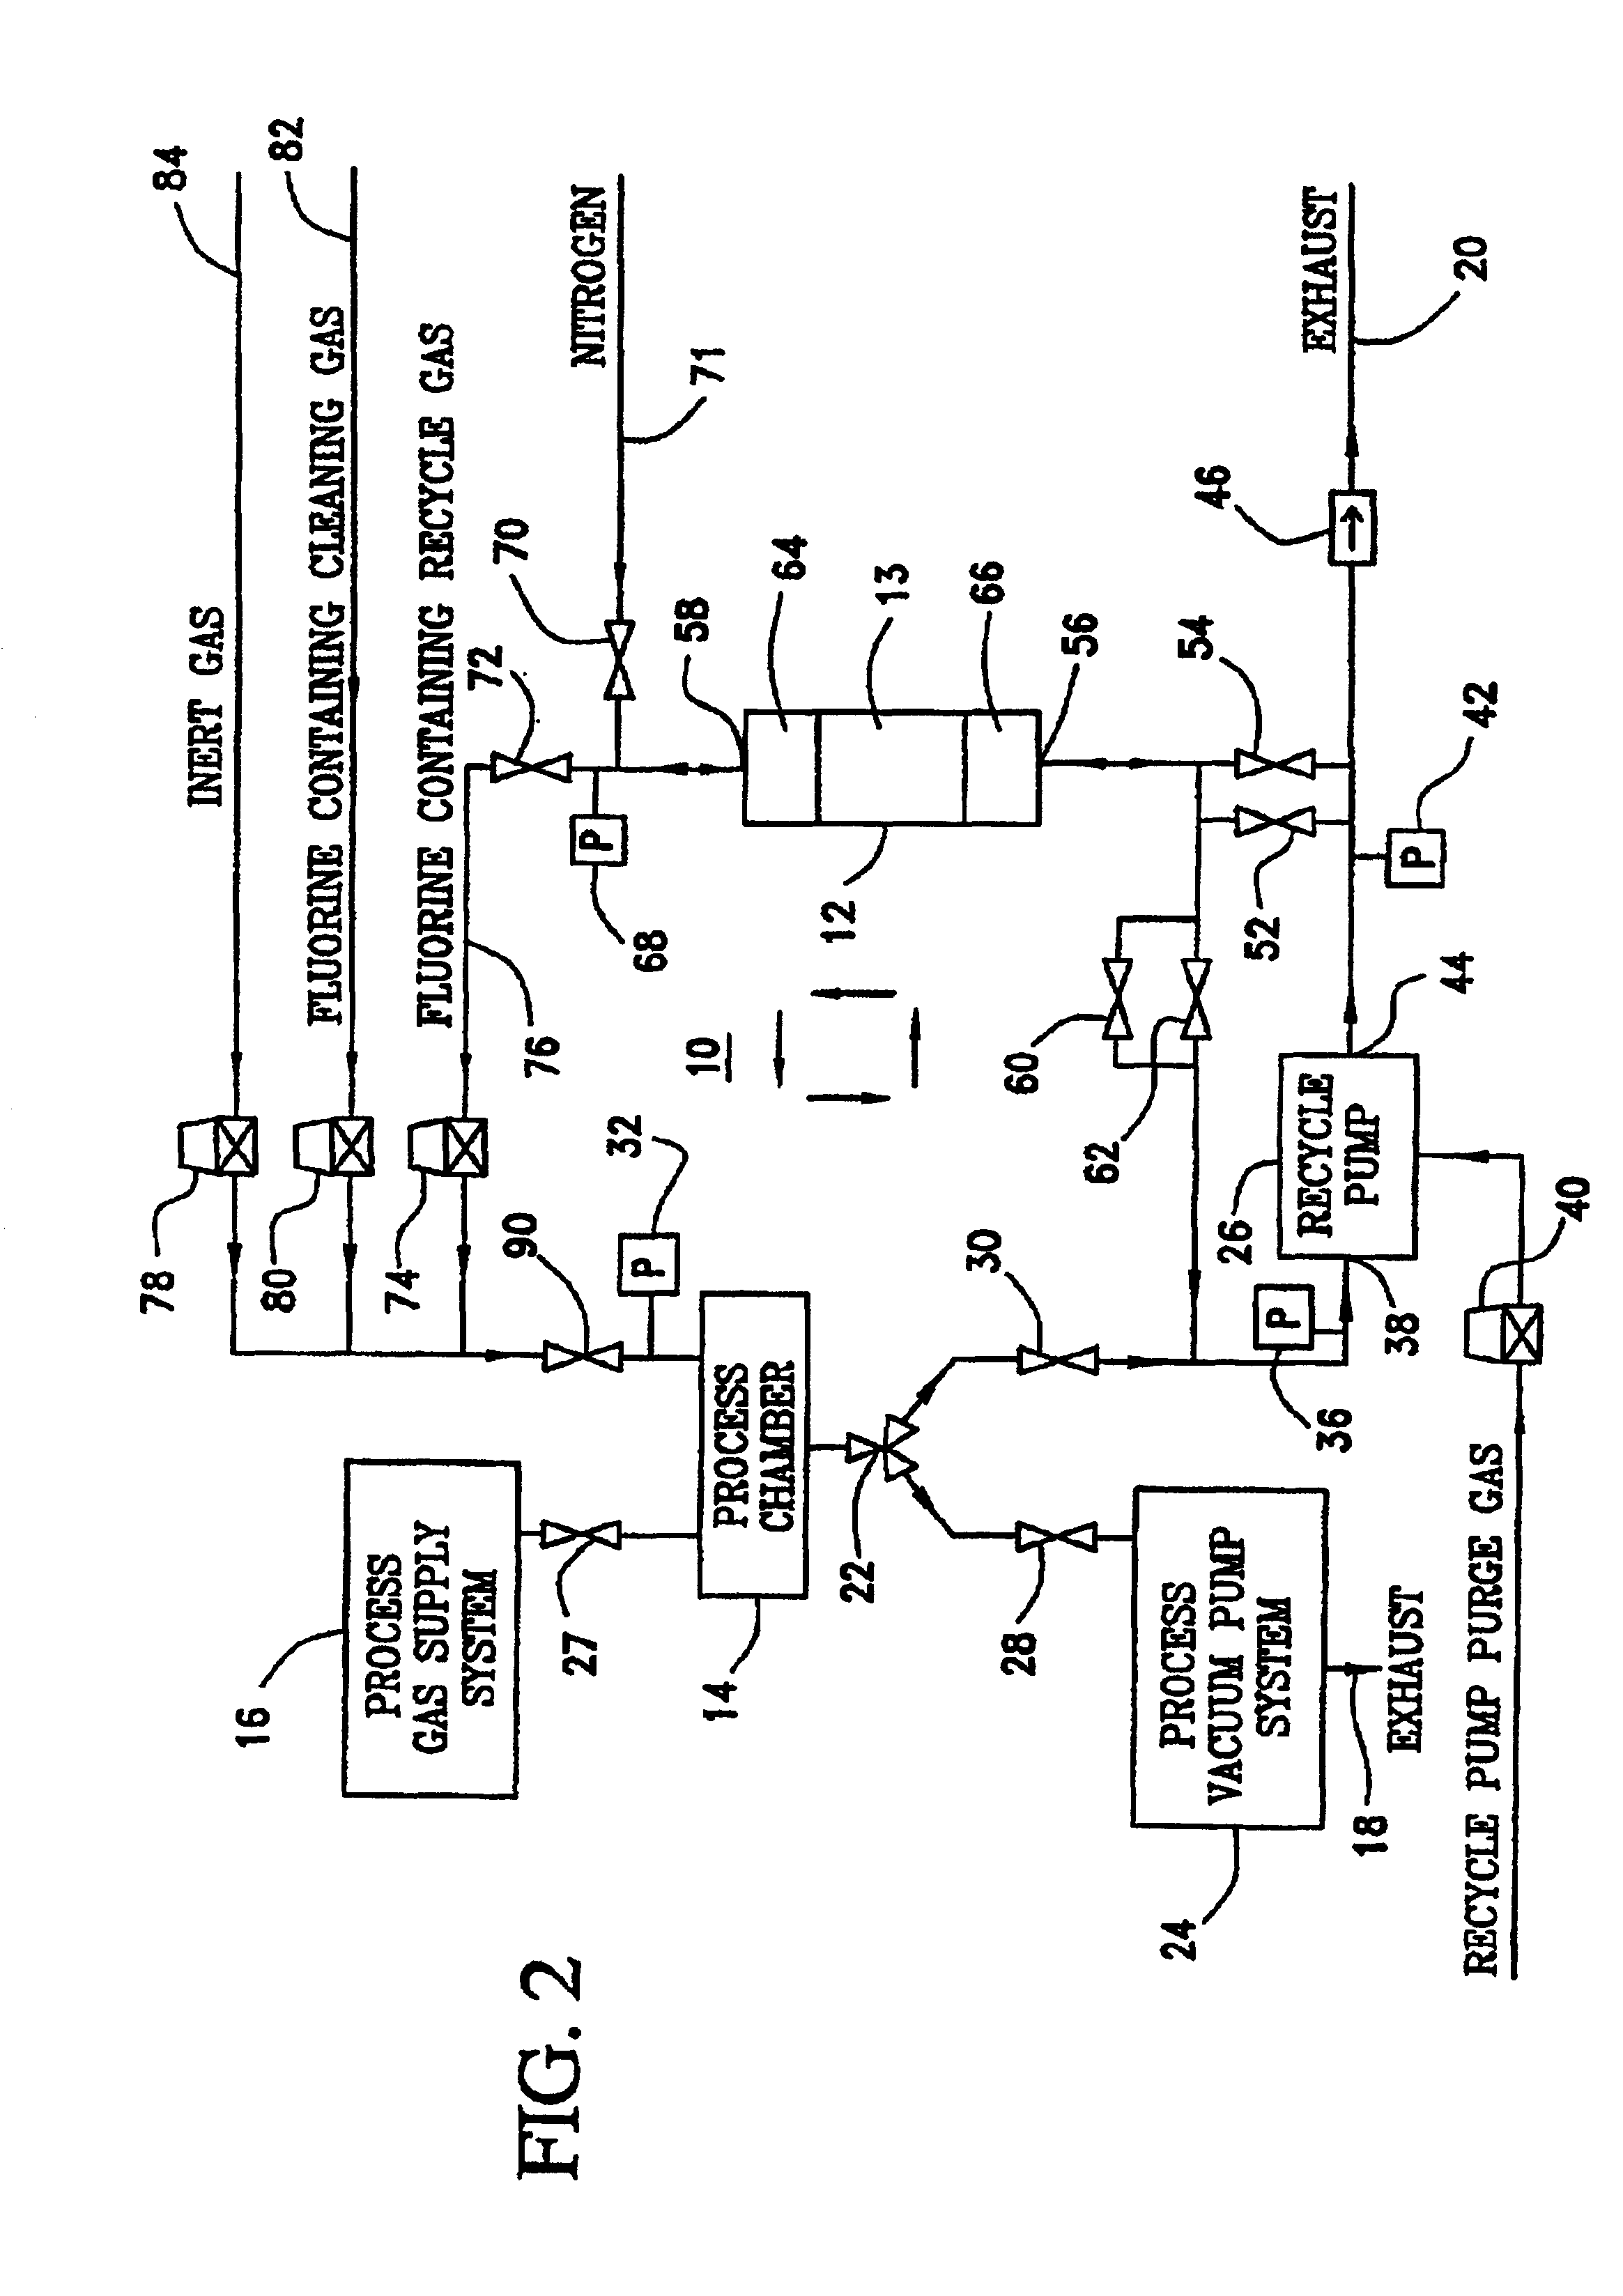 Method of recycling fluorine using an adsorption purification process